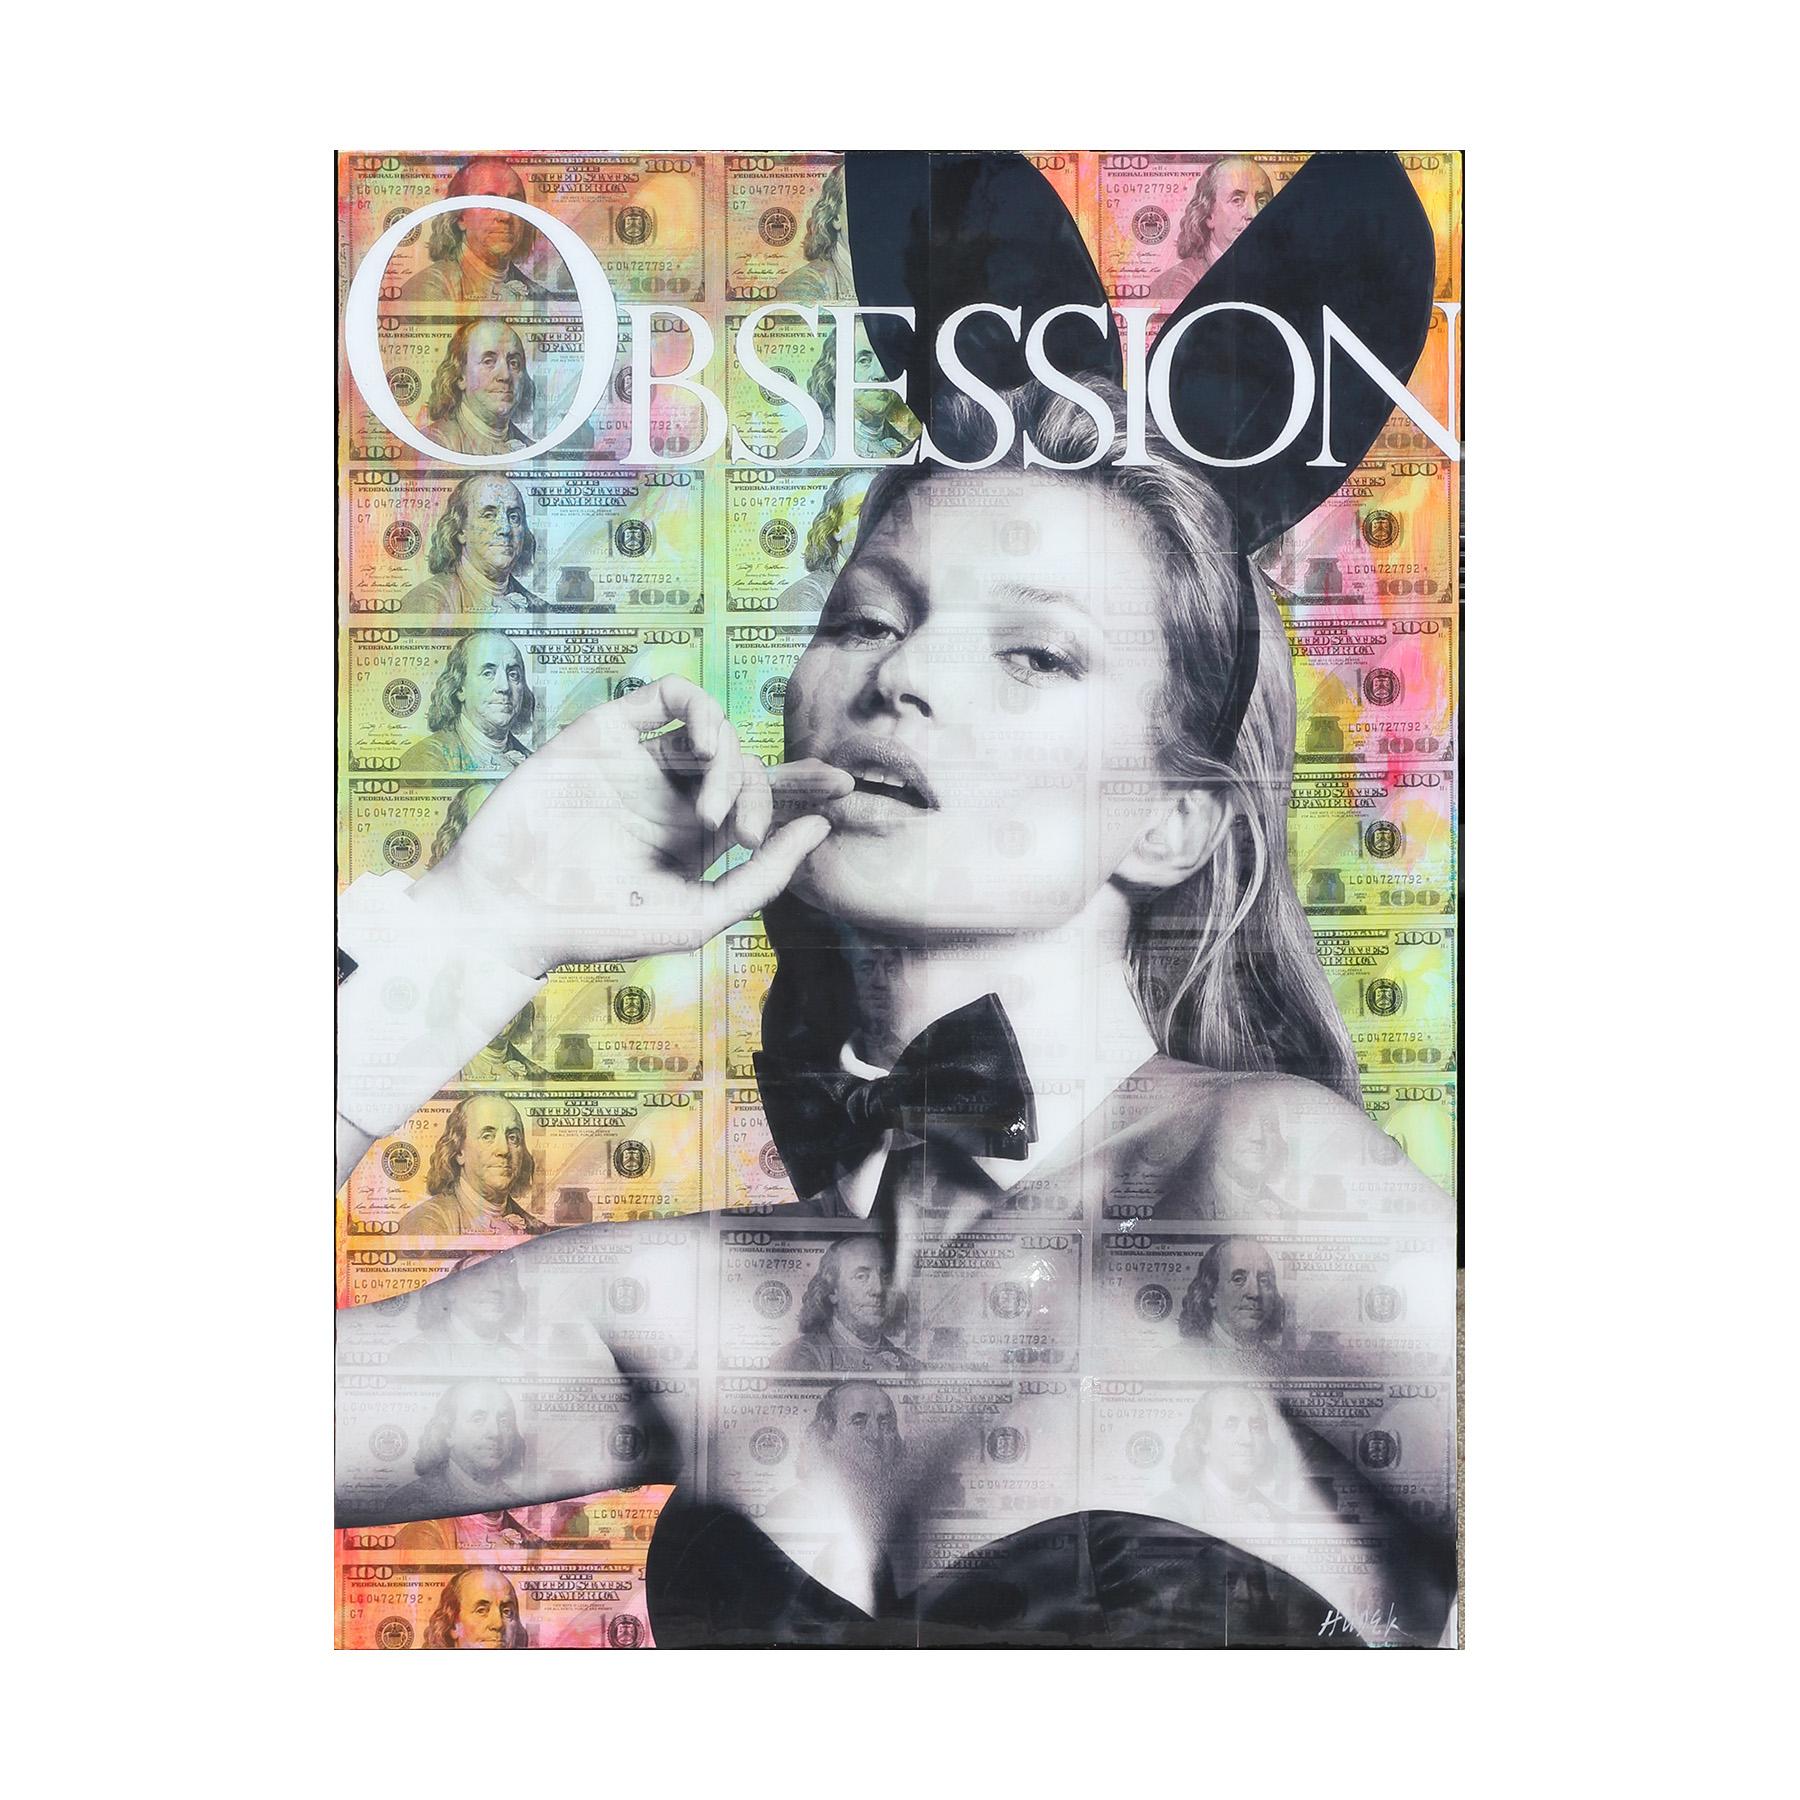 Kate Moss Playboy Model Obsession Mixed Media Contemporary Collage - Mixed Media Art by Jim Hudek